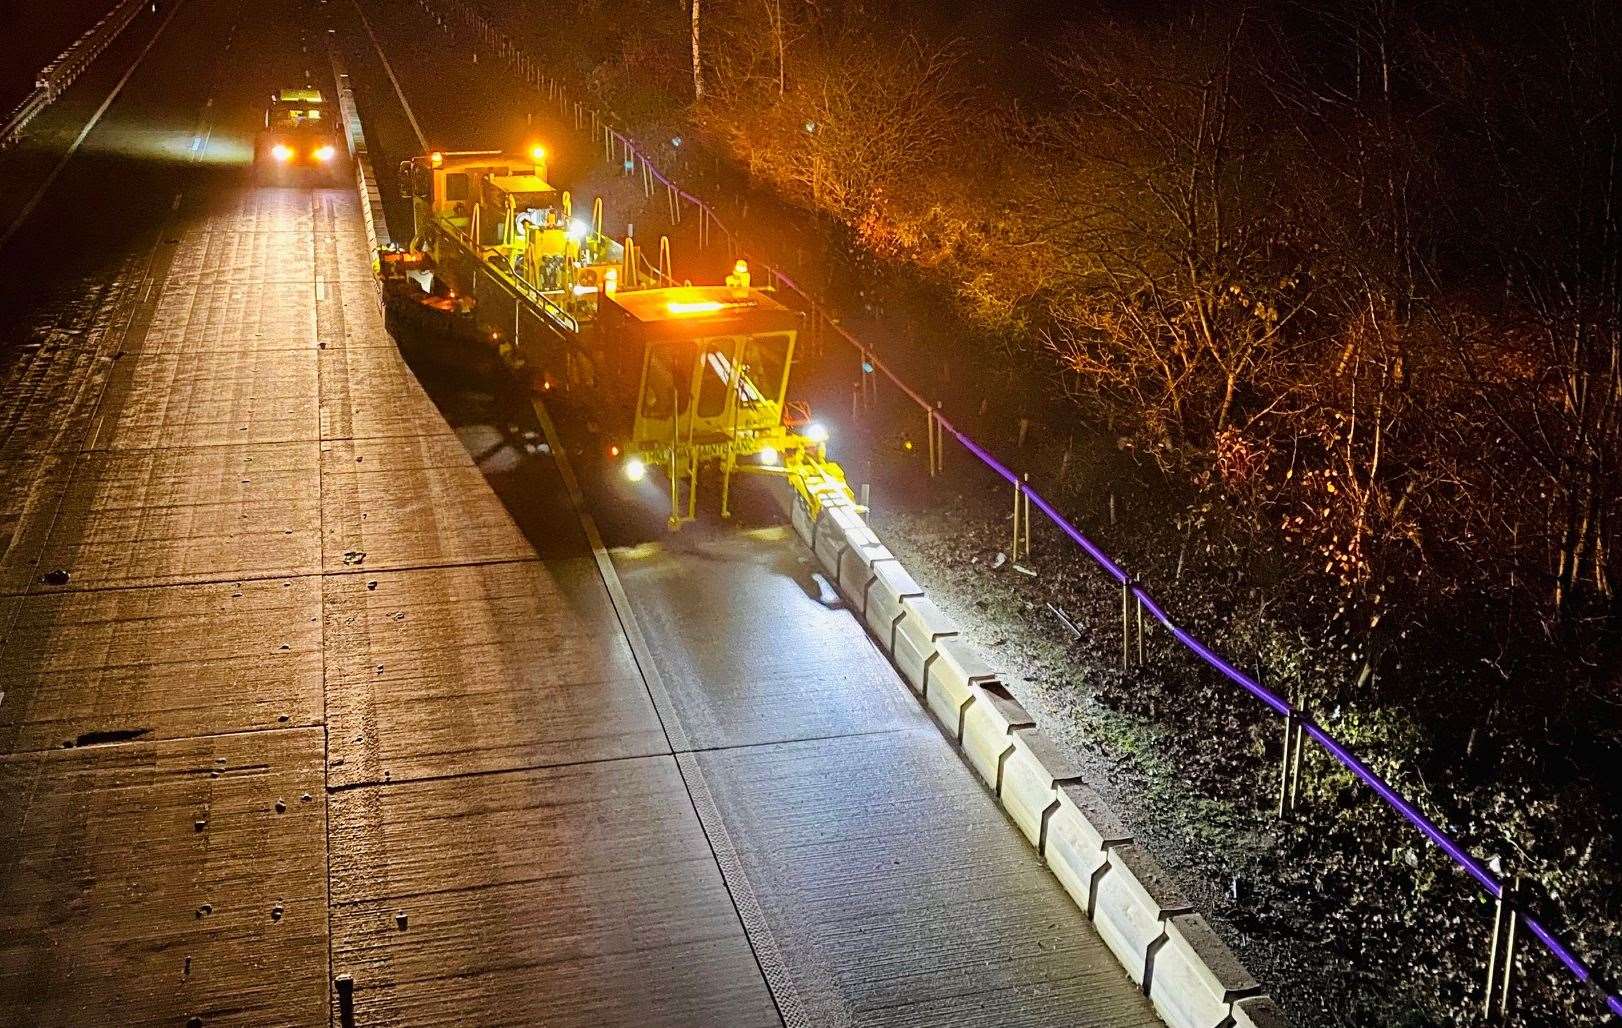 The concrete barrier usually stored on the hard shoulder will be moved to the central reservation. Picture: Barry Goodwin